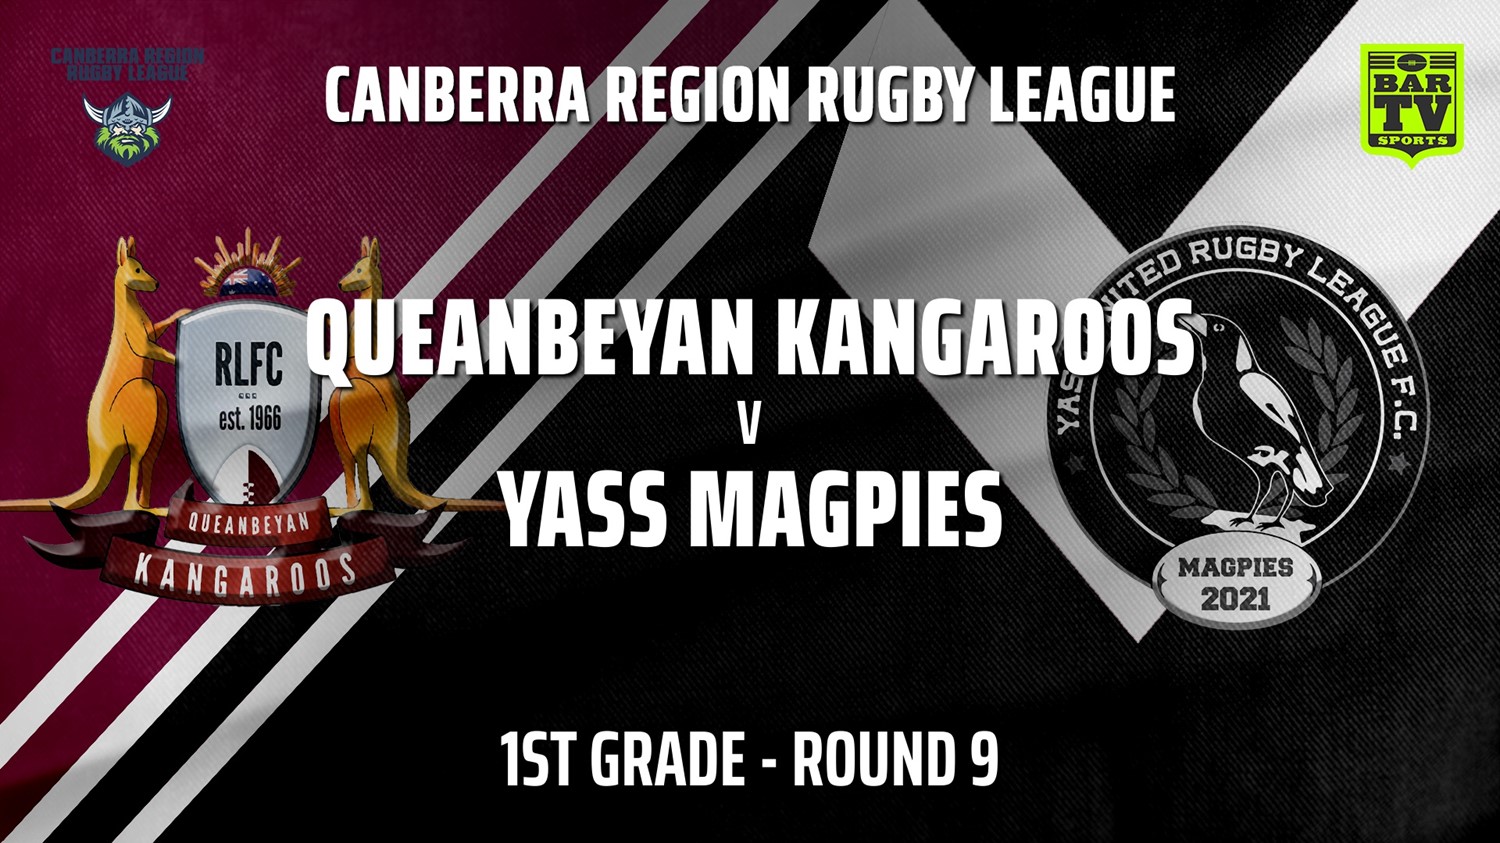 210619-Canberra Round 9 - 1st Grade - Queanbeyan Kangaroos v Yass Magpies Minigame Slate Image